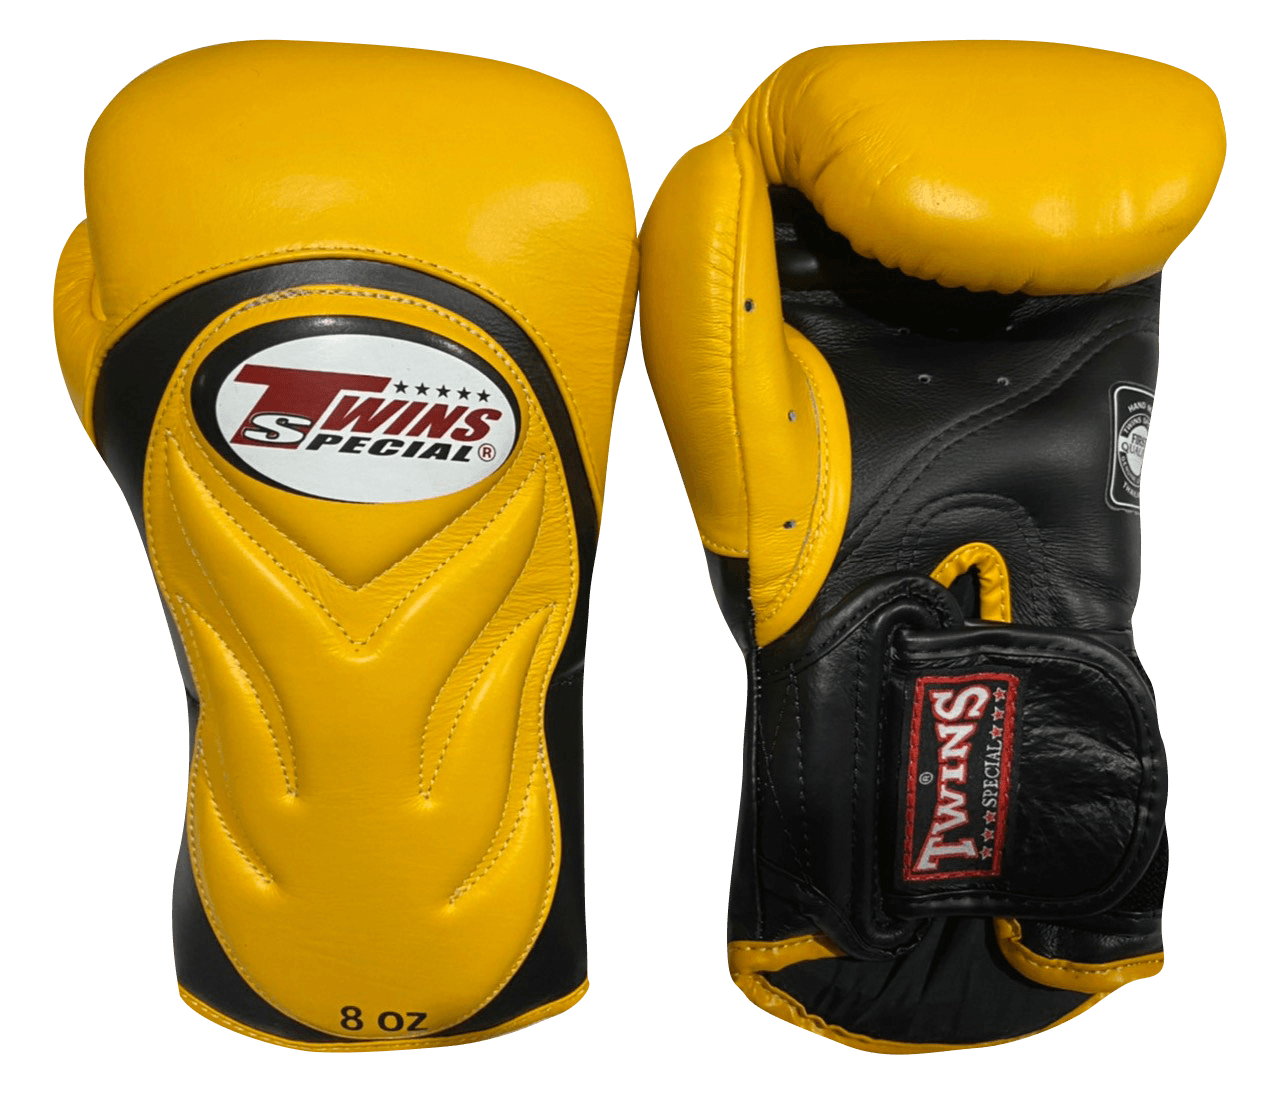 Twins Special Boxing Gloves BGVL6 Black Yellow Twins Special